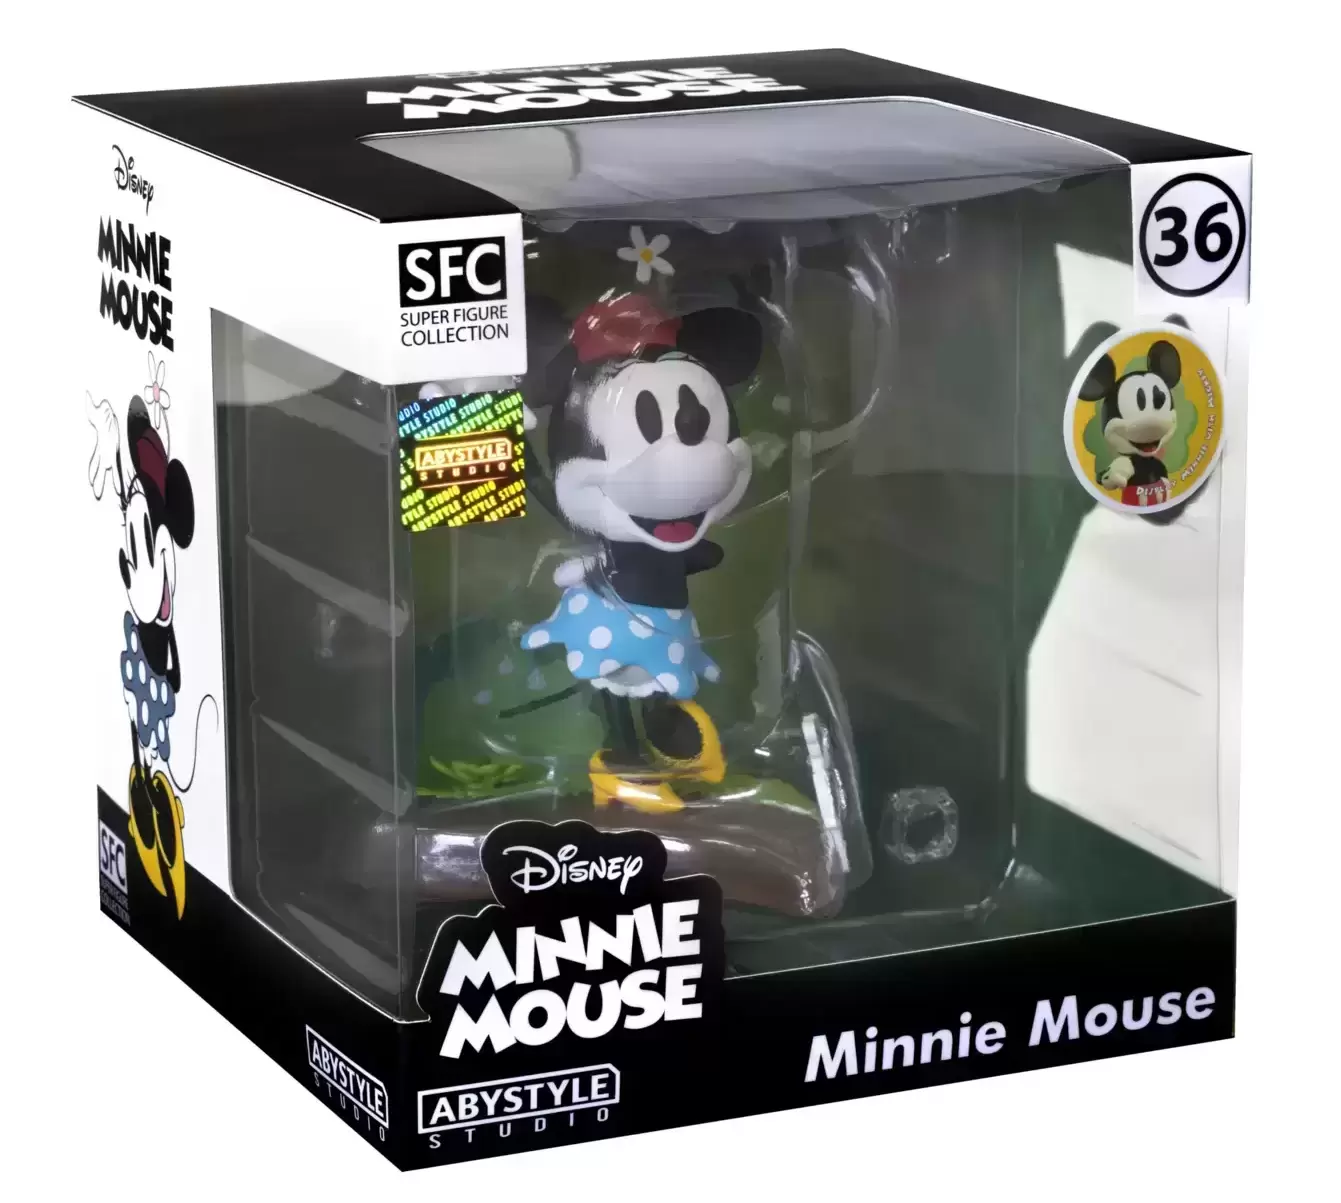 SFC - Super Figure Collection by AbyStyle Studio - Disney - Minnie Mouse